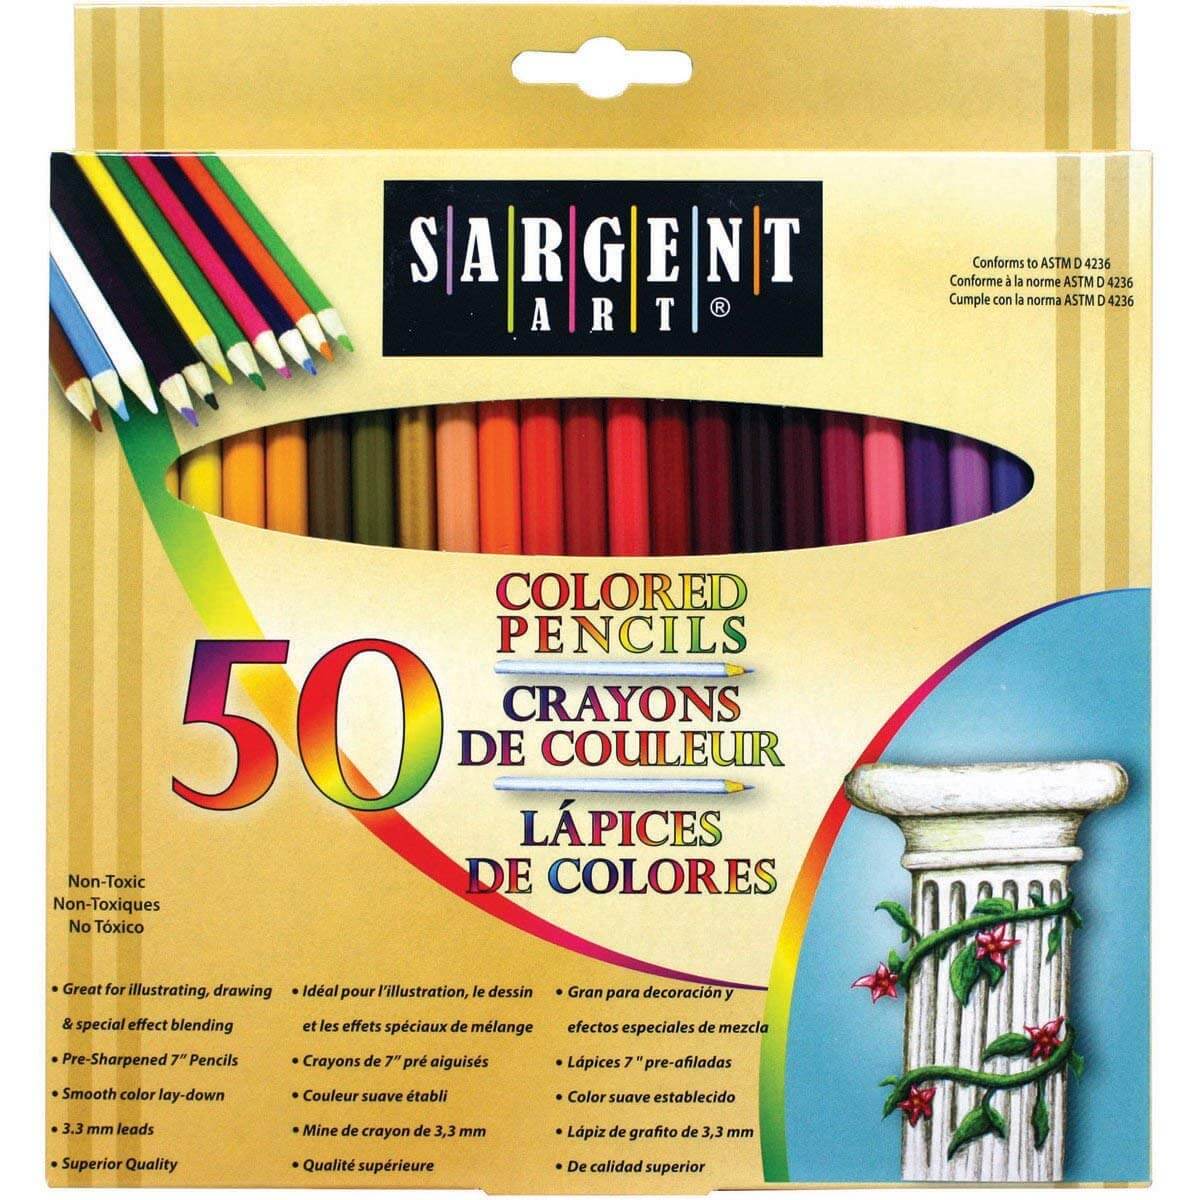 Sargent Coloring Pencils - Best Supplies For Adult Coloring Blog